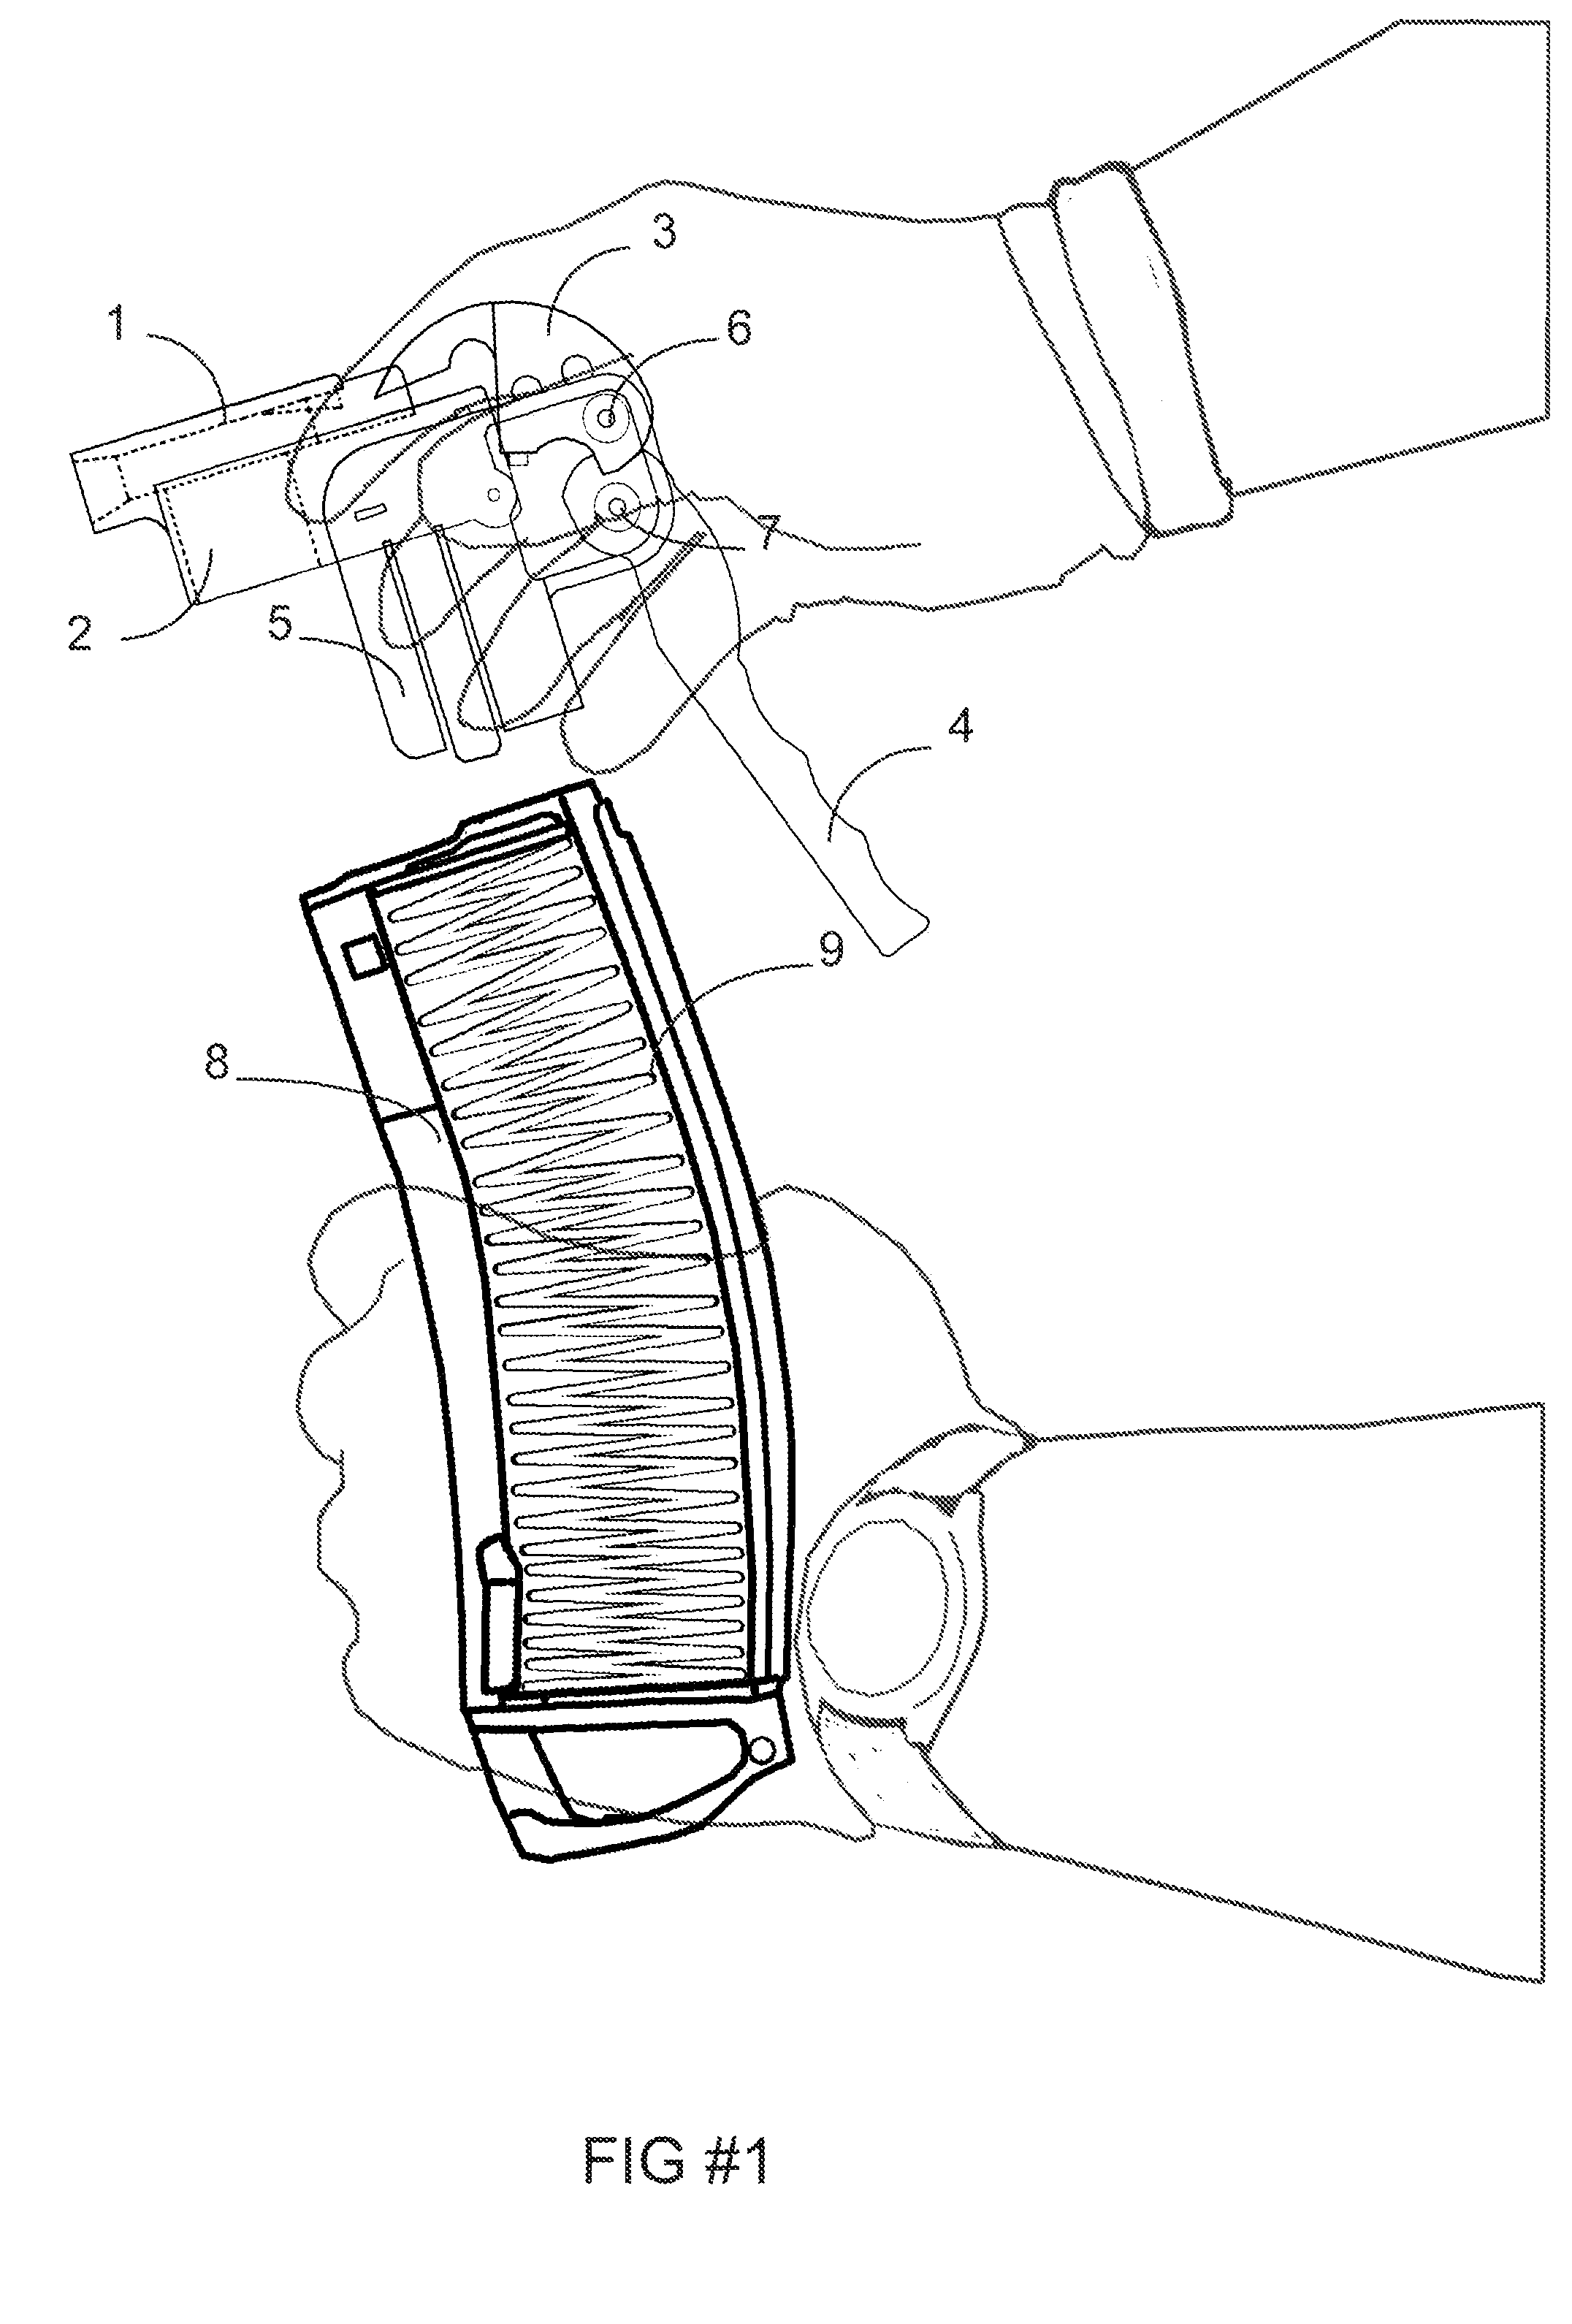 Magazine Loading Device for Loading Bullets or Cartridges into a Magazine